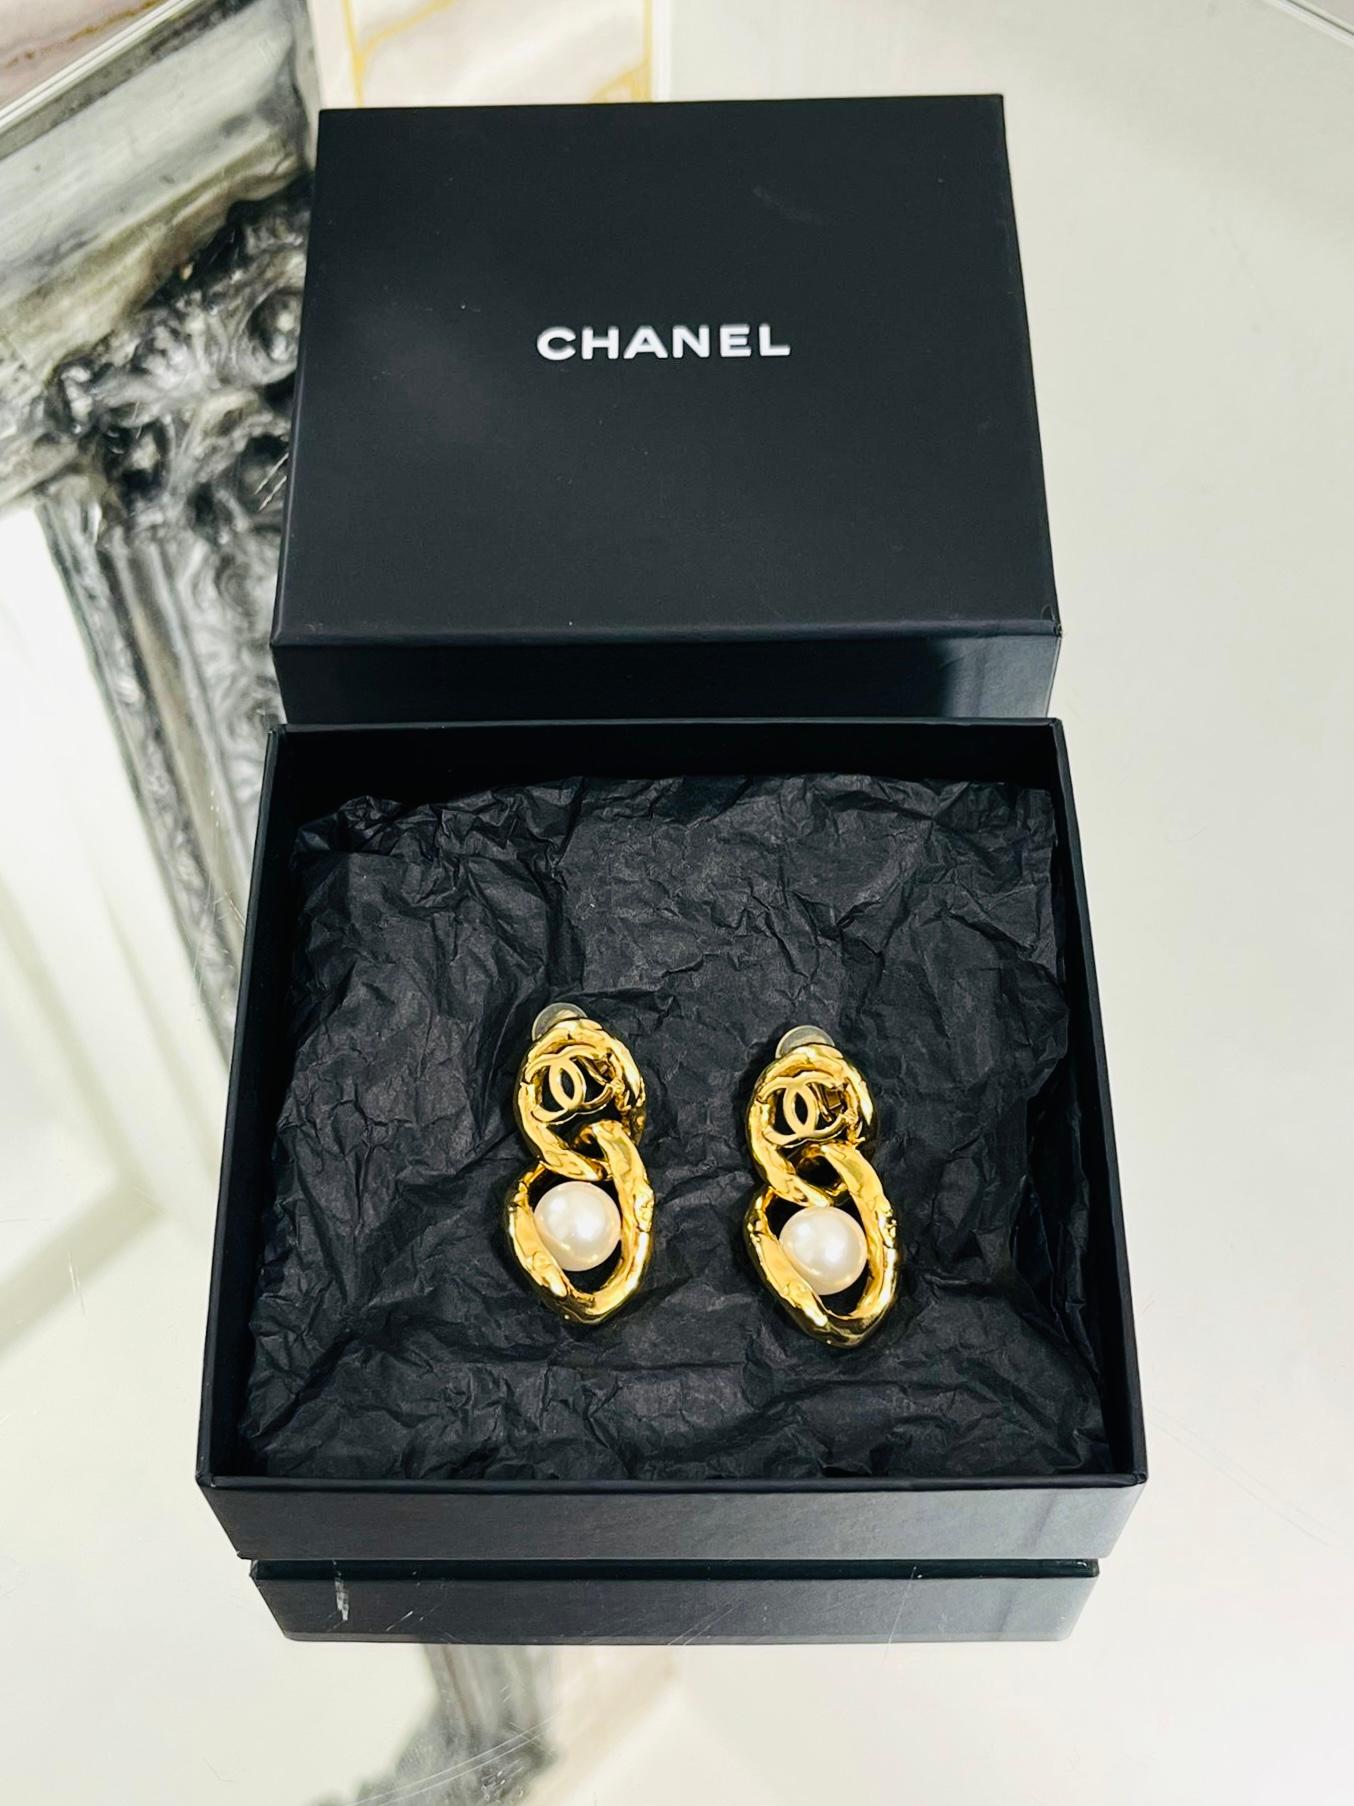 Chanel 'CC' Logo & Pearl Dangle Earrings

24k gold plated chunky link dangle earrings with a large 'CC' logo 

and a pearl. From 2010 collection. Clip on.

Size - One Size

Condition - Very Good

Composition - 24k Gold Plate, Faux Pearl

Comes With